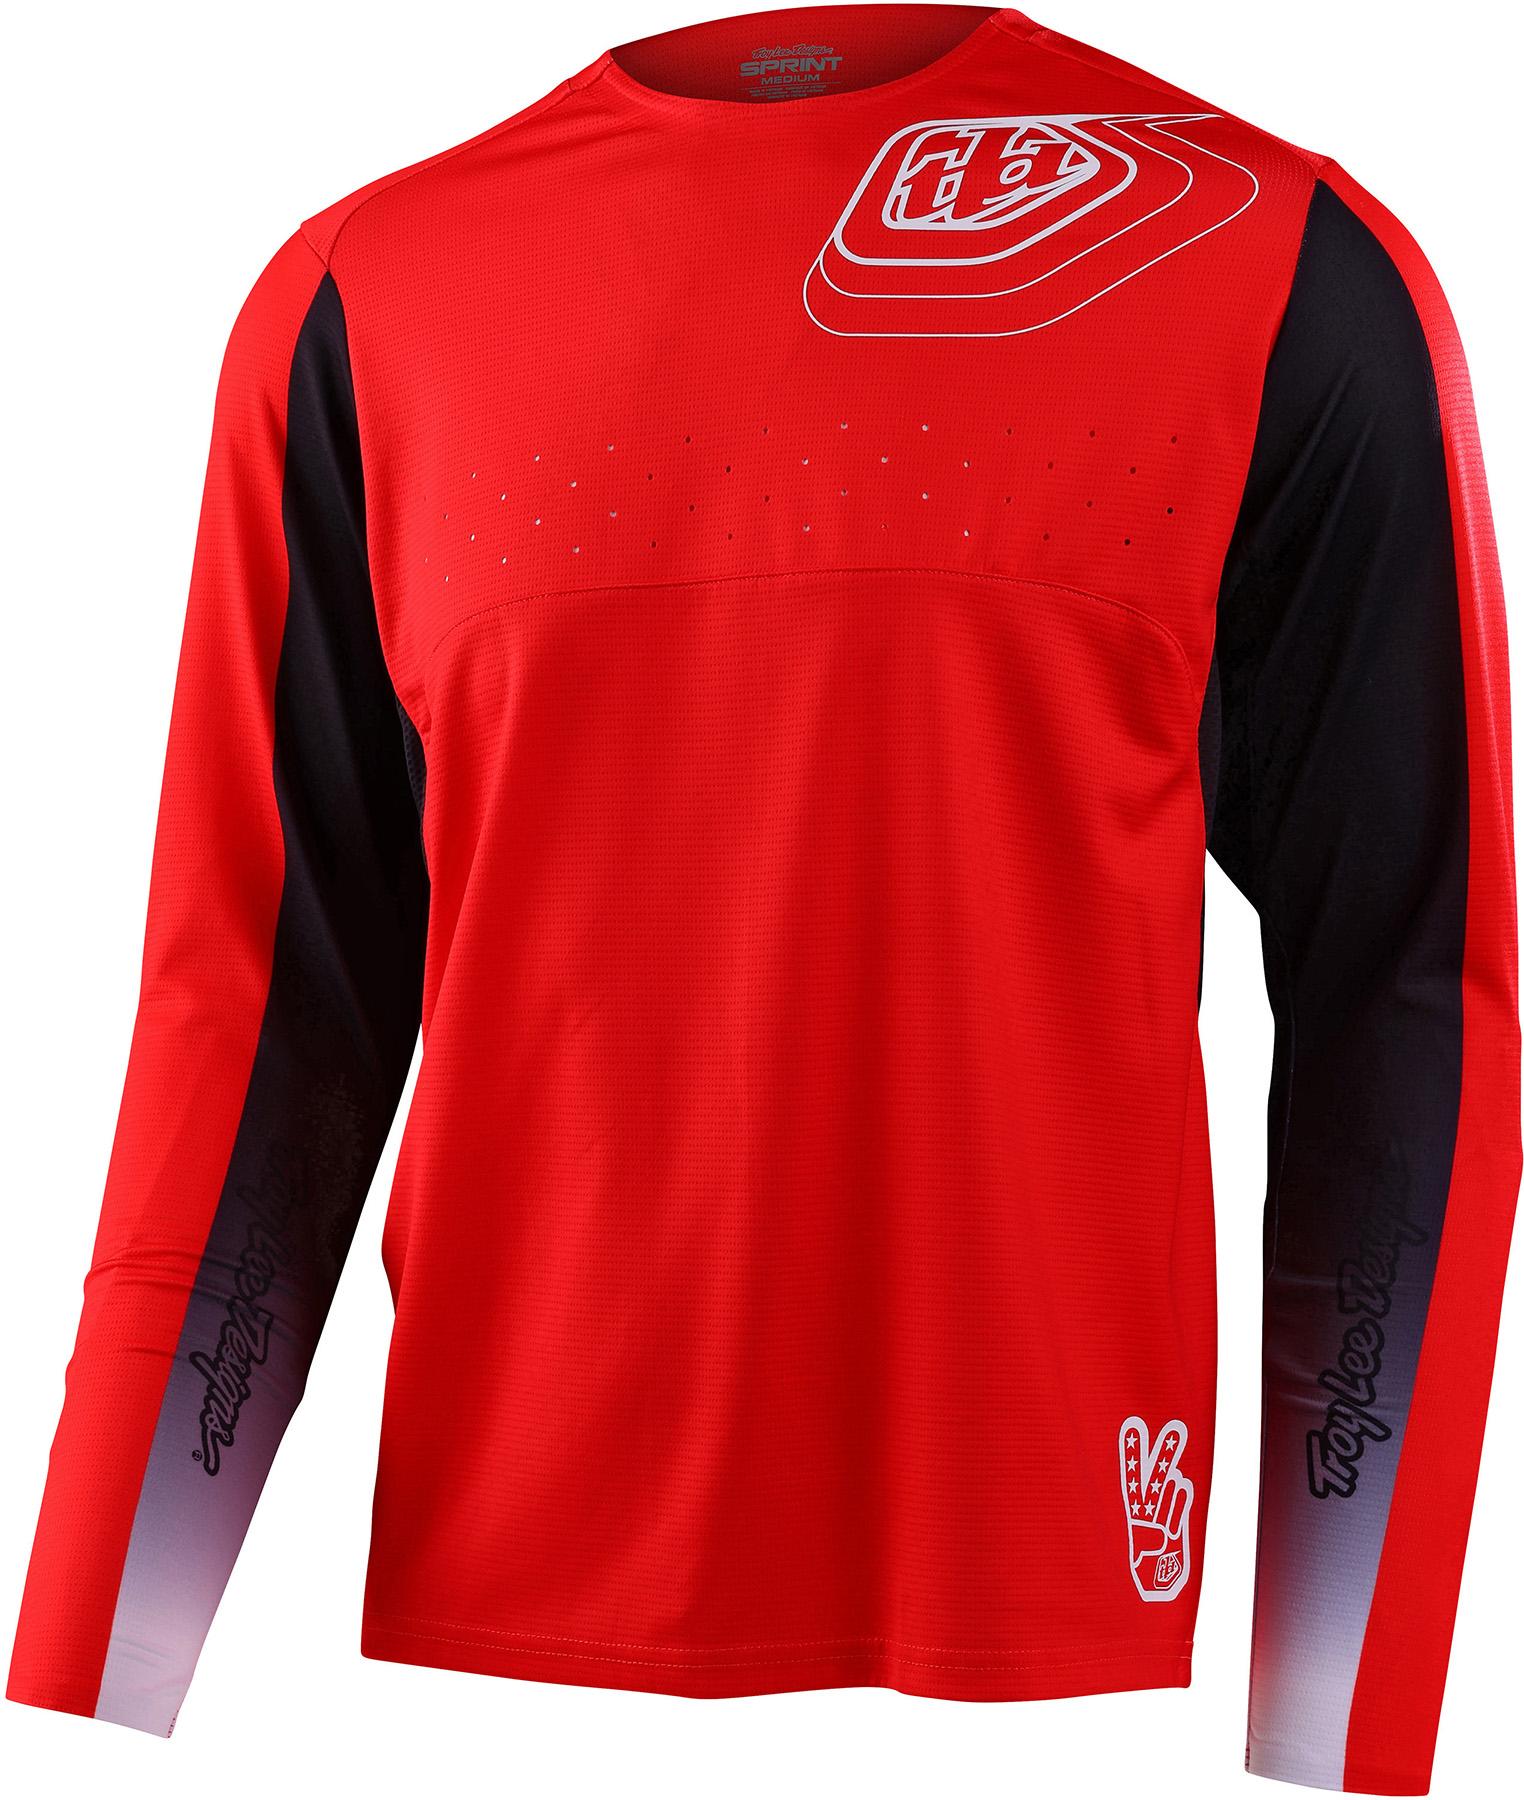 Troy Lee Designs Sprint Ritcher Cycling Jersey  Race Red